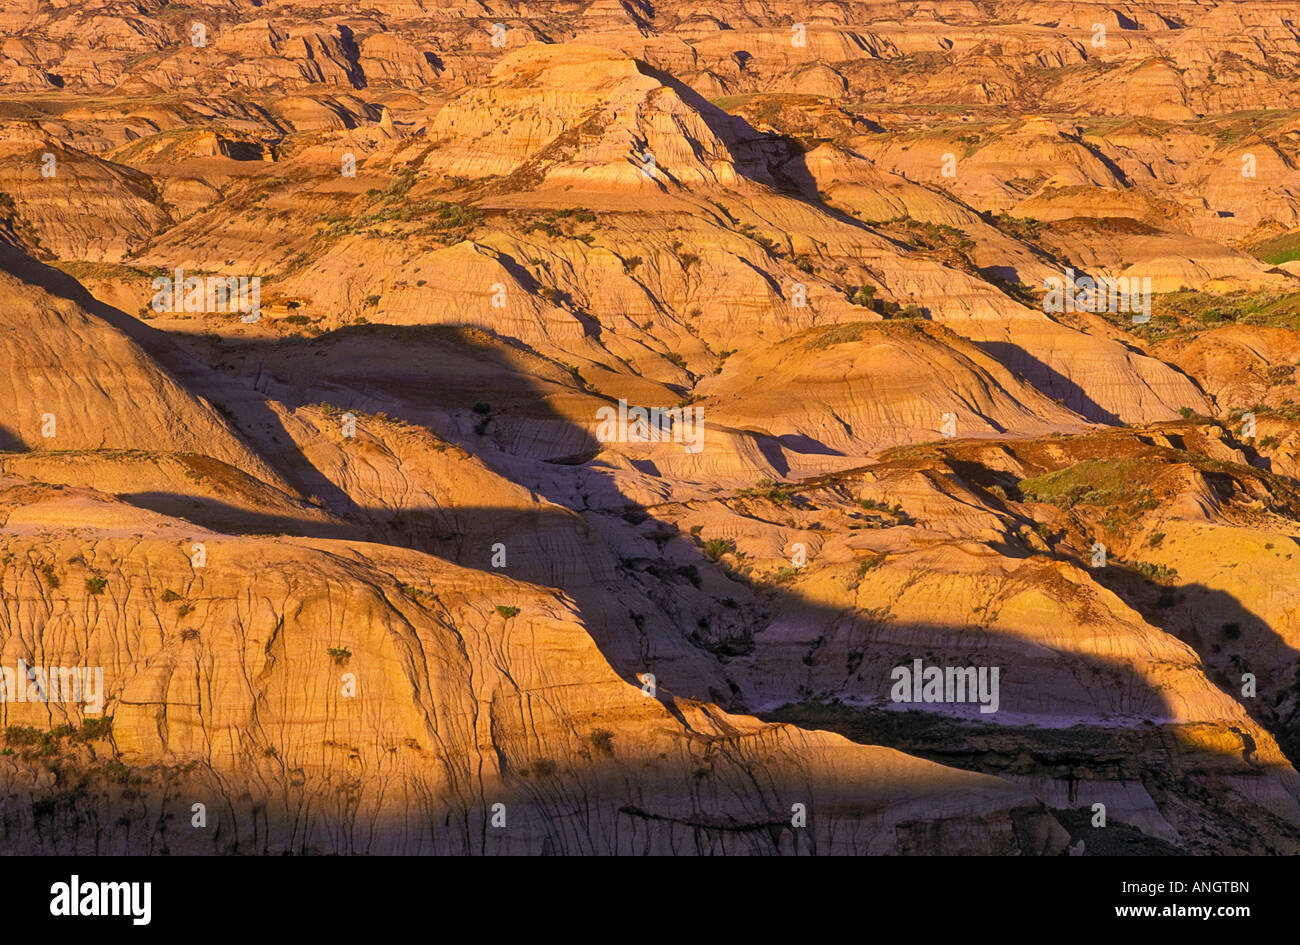 Sandstone hills carved from melting ice water from the last ice age about 13,000 years ago form part of the badland topography o Stock Photo